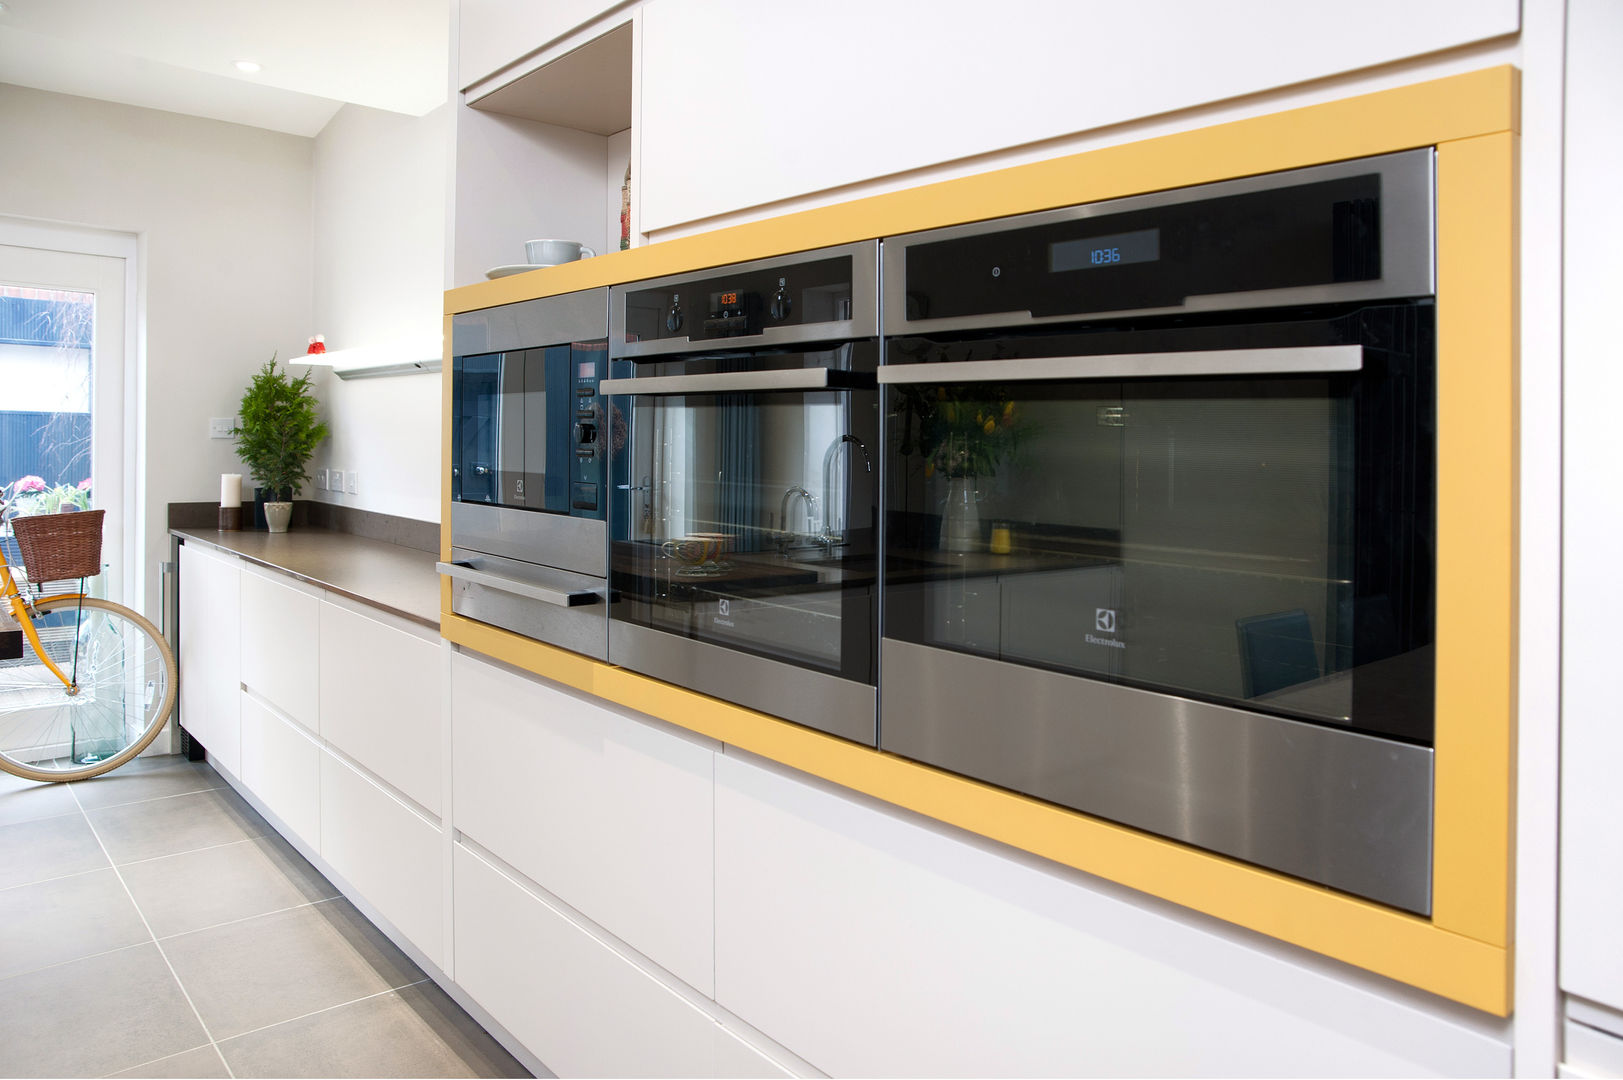 Electrolux appliances wrapped in Curry Yellow panelling Haus12 Interiors Dapur Modern